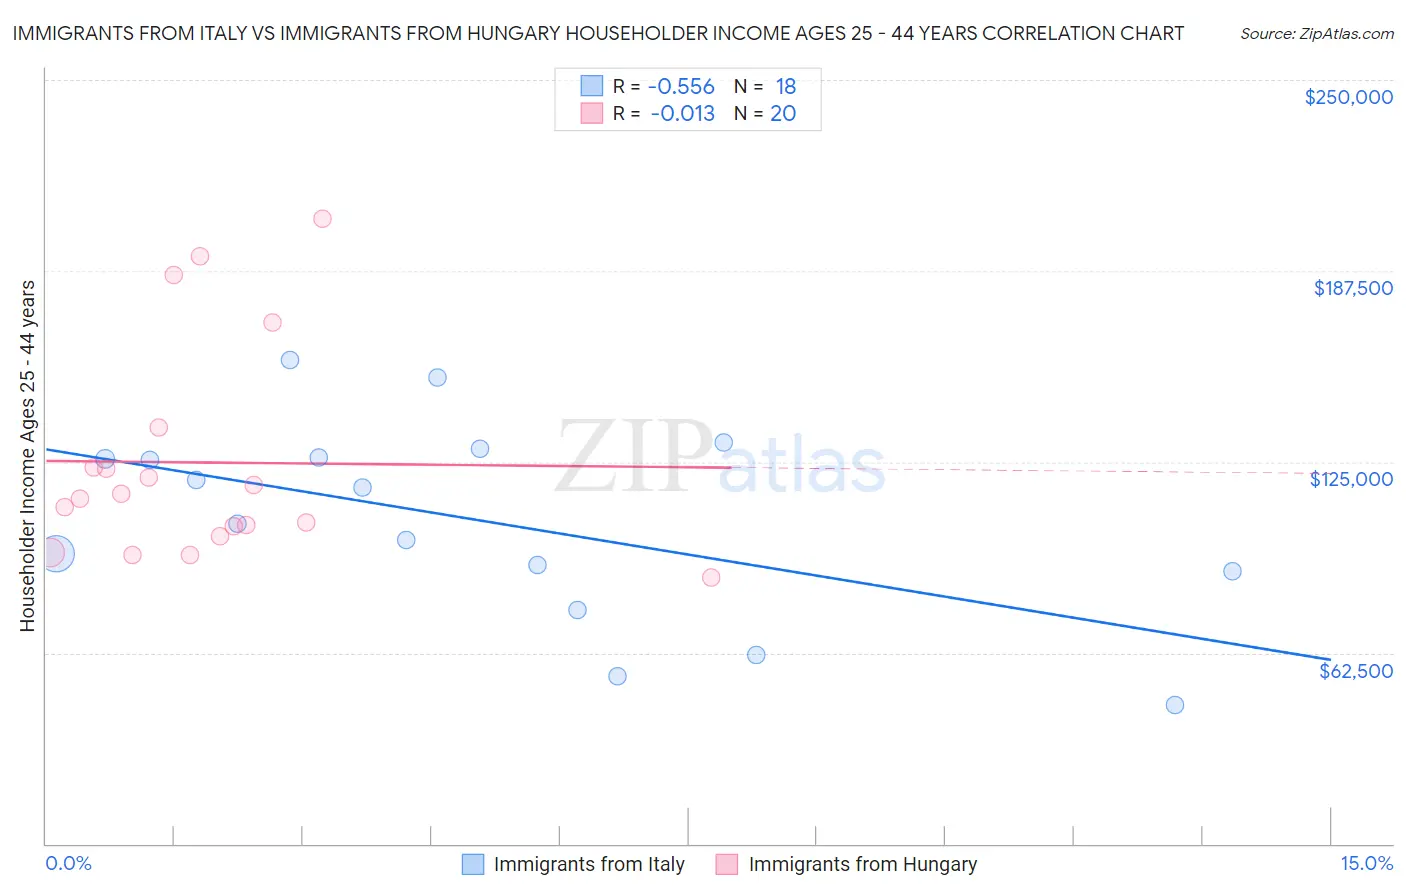 Immigrants from Italy vs Immigrants from Hungary Householder Income Ages 25 - 44 years